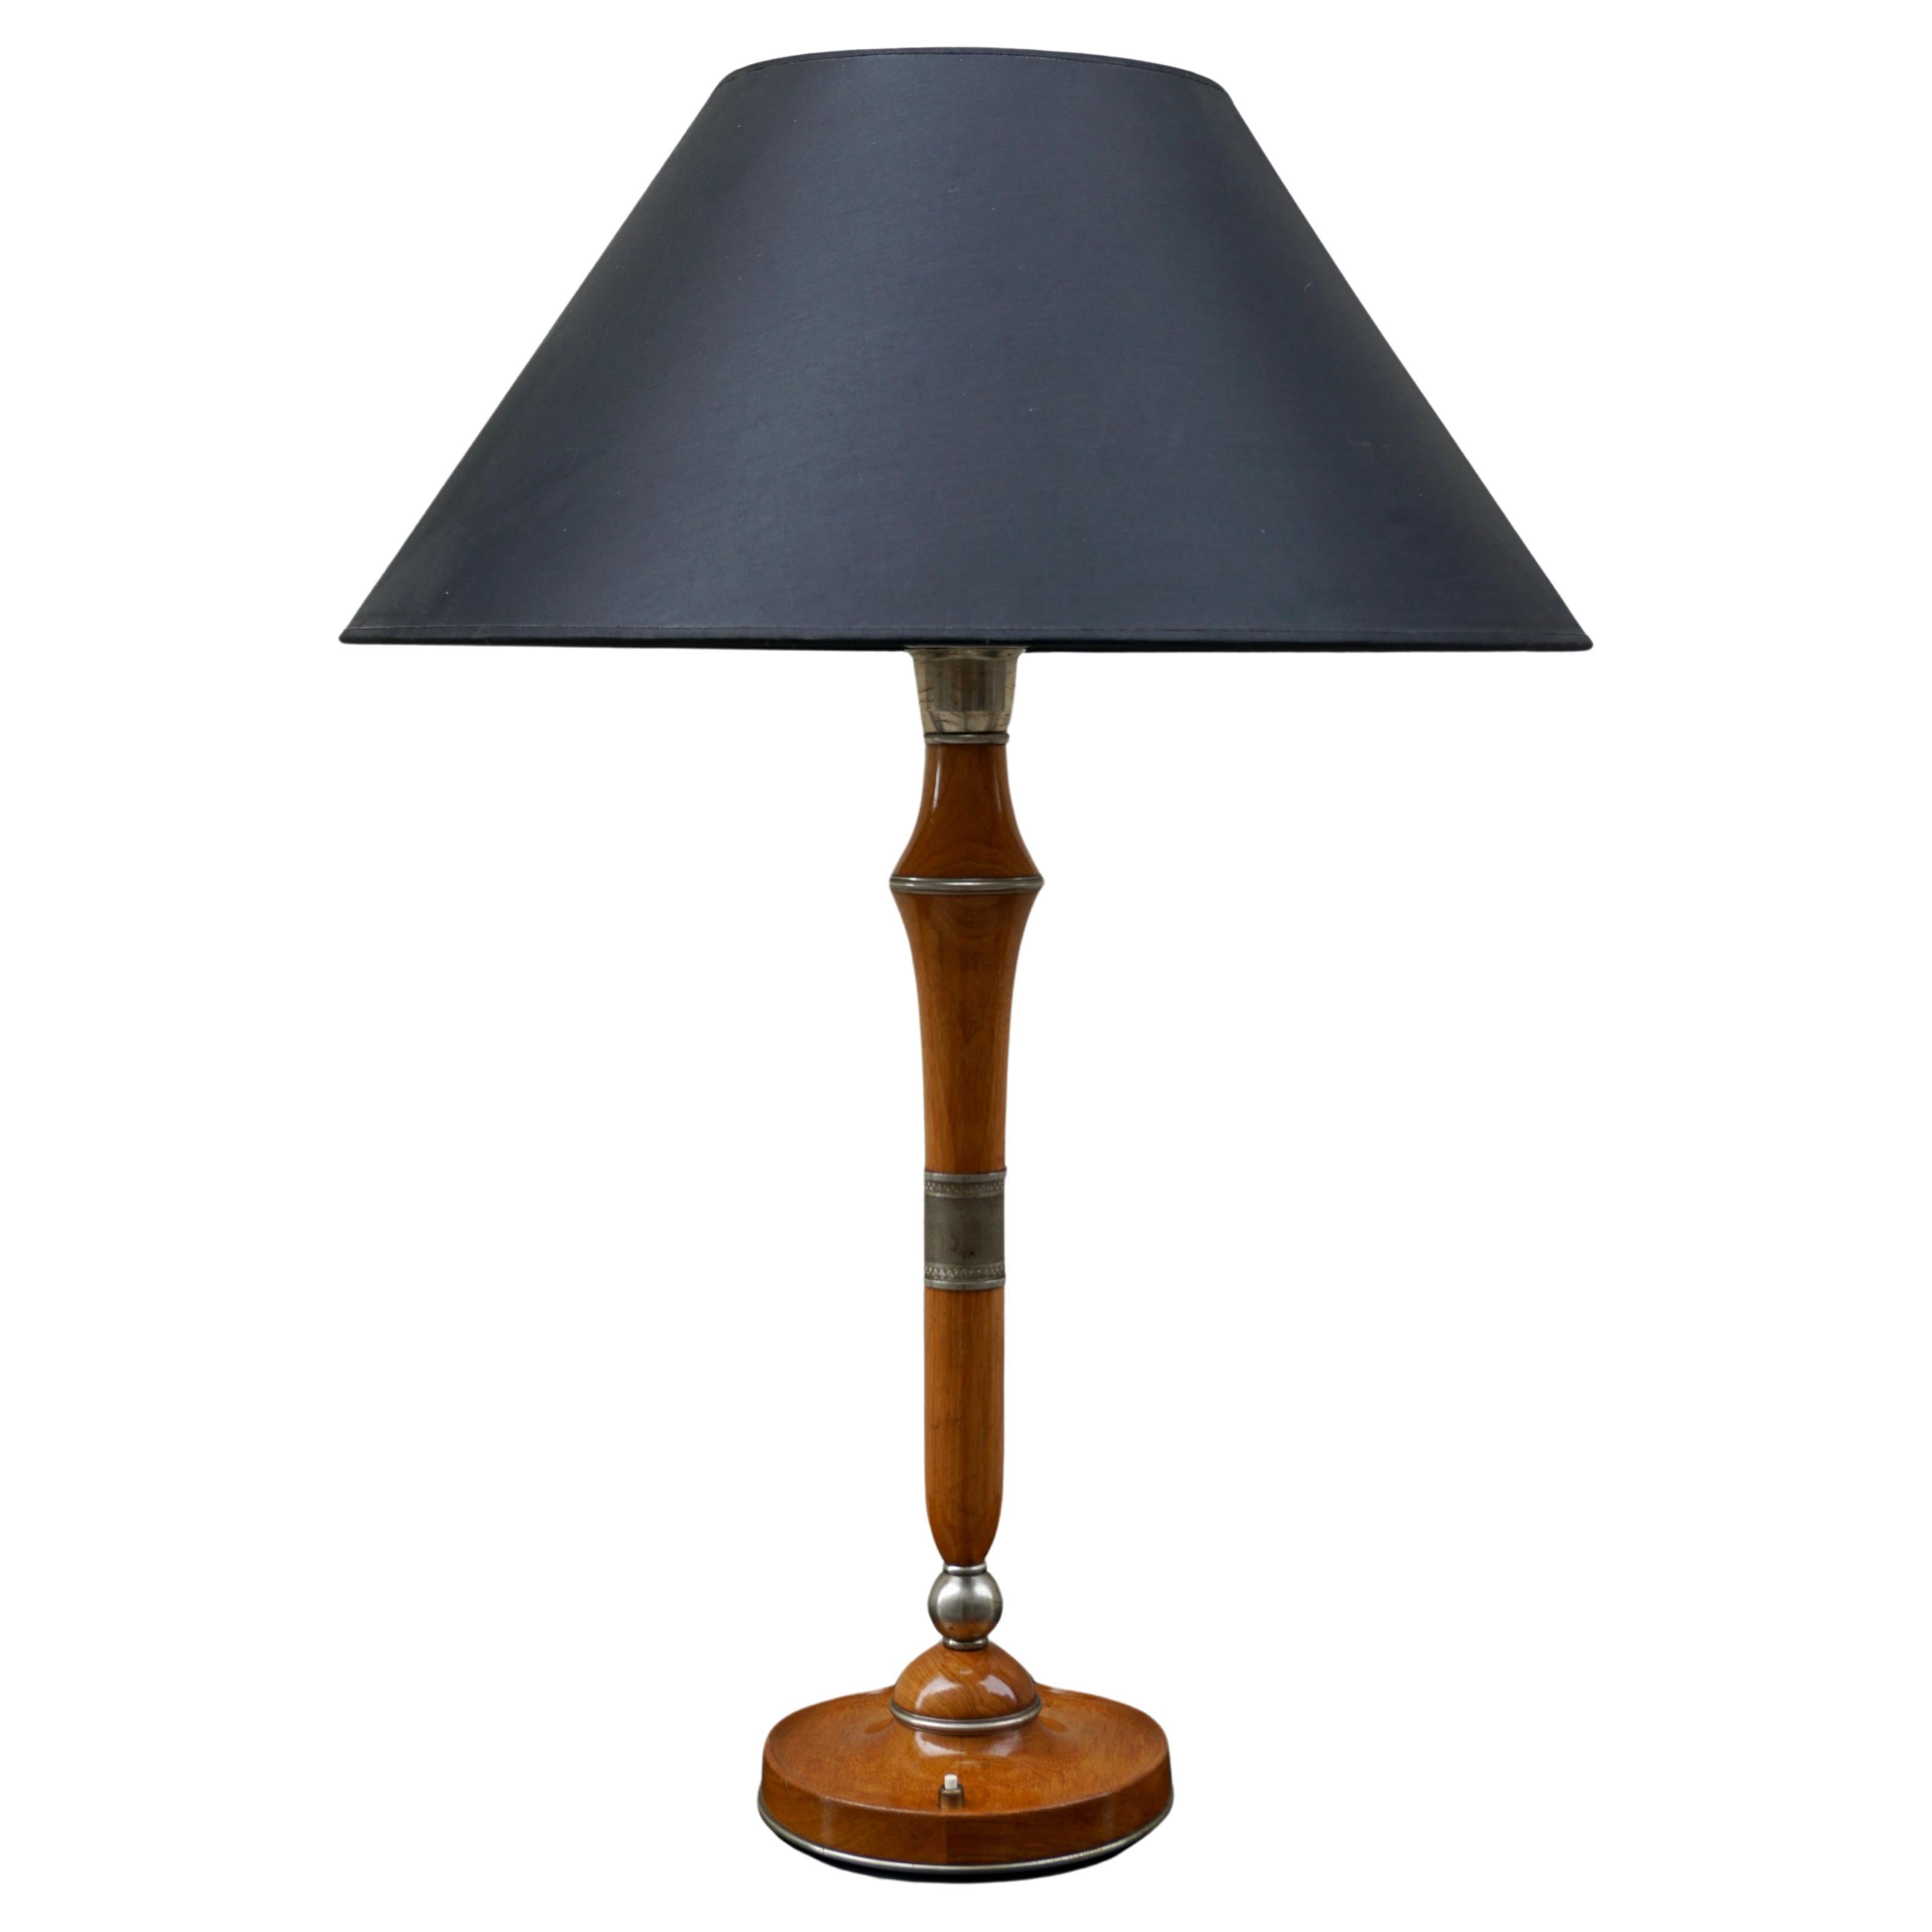 Wonderful vintage mid century modern table lamp with a sculpted wooden body.

Shade shown are for demonstration purposes only.